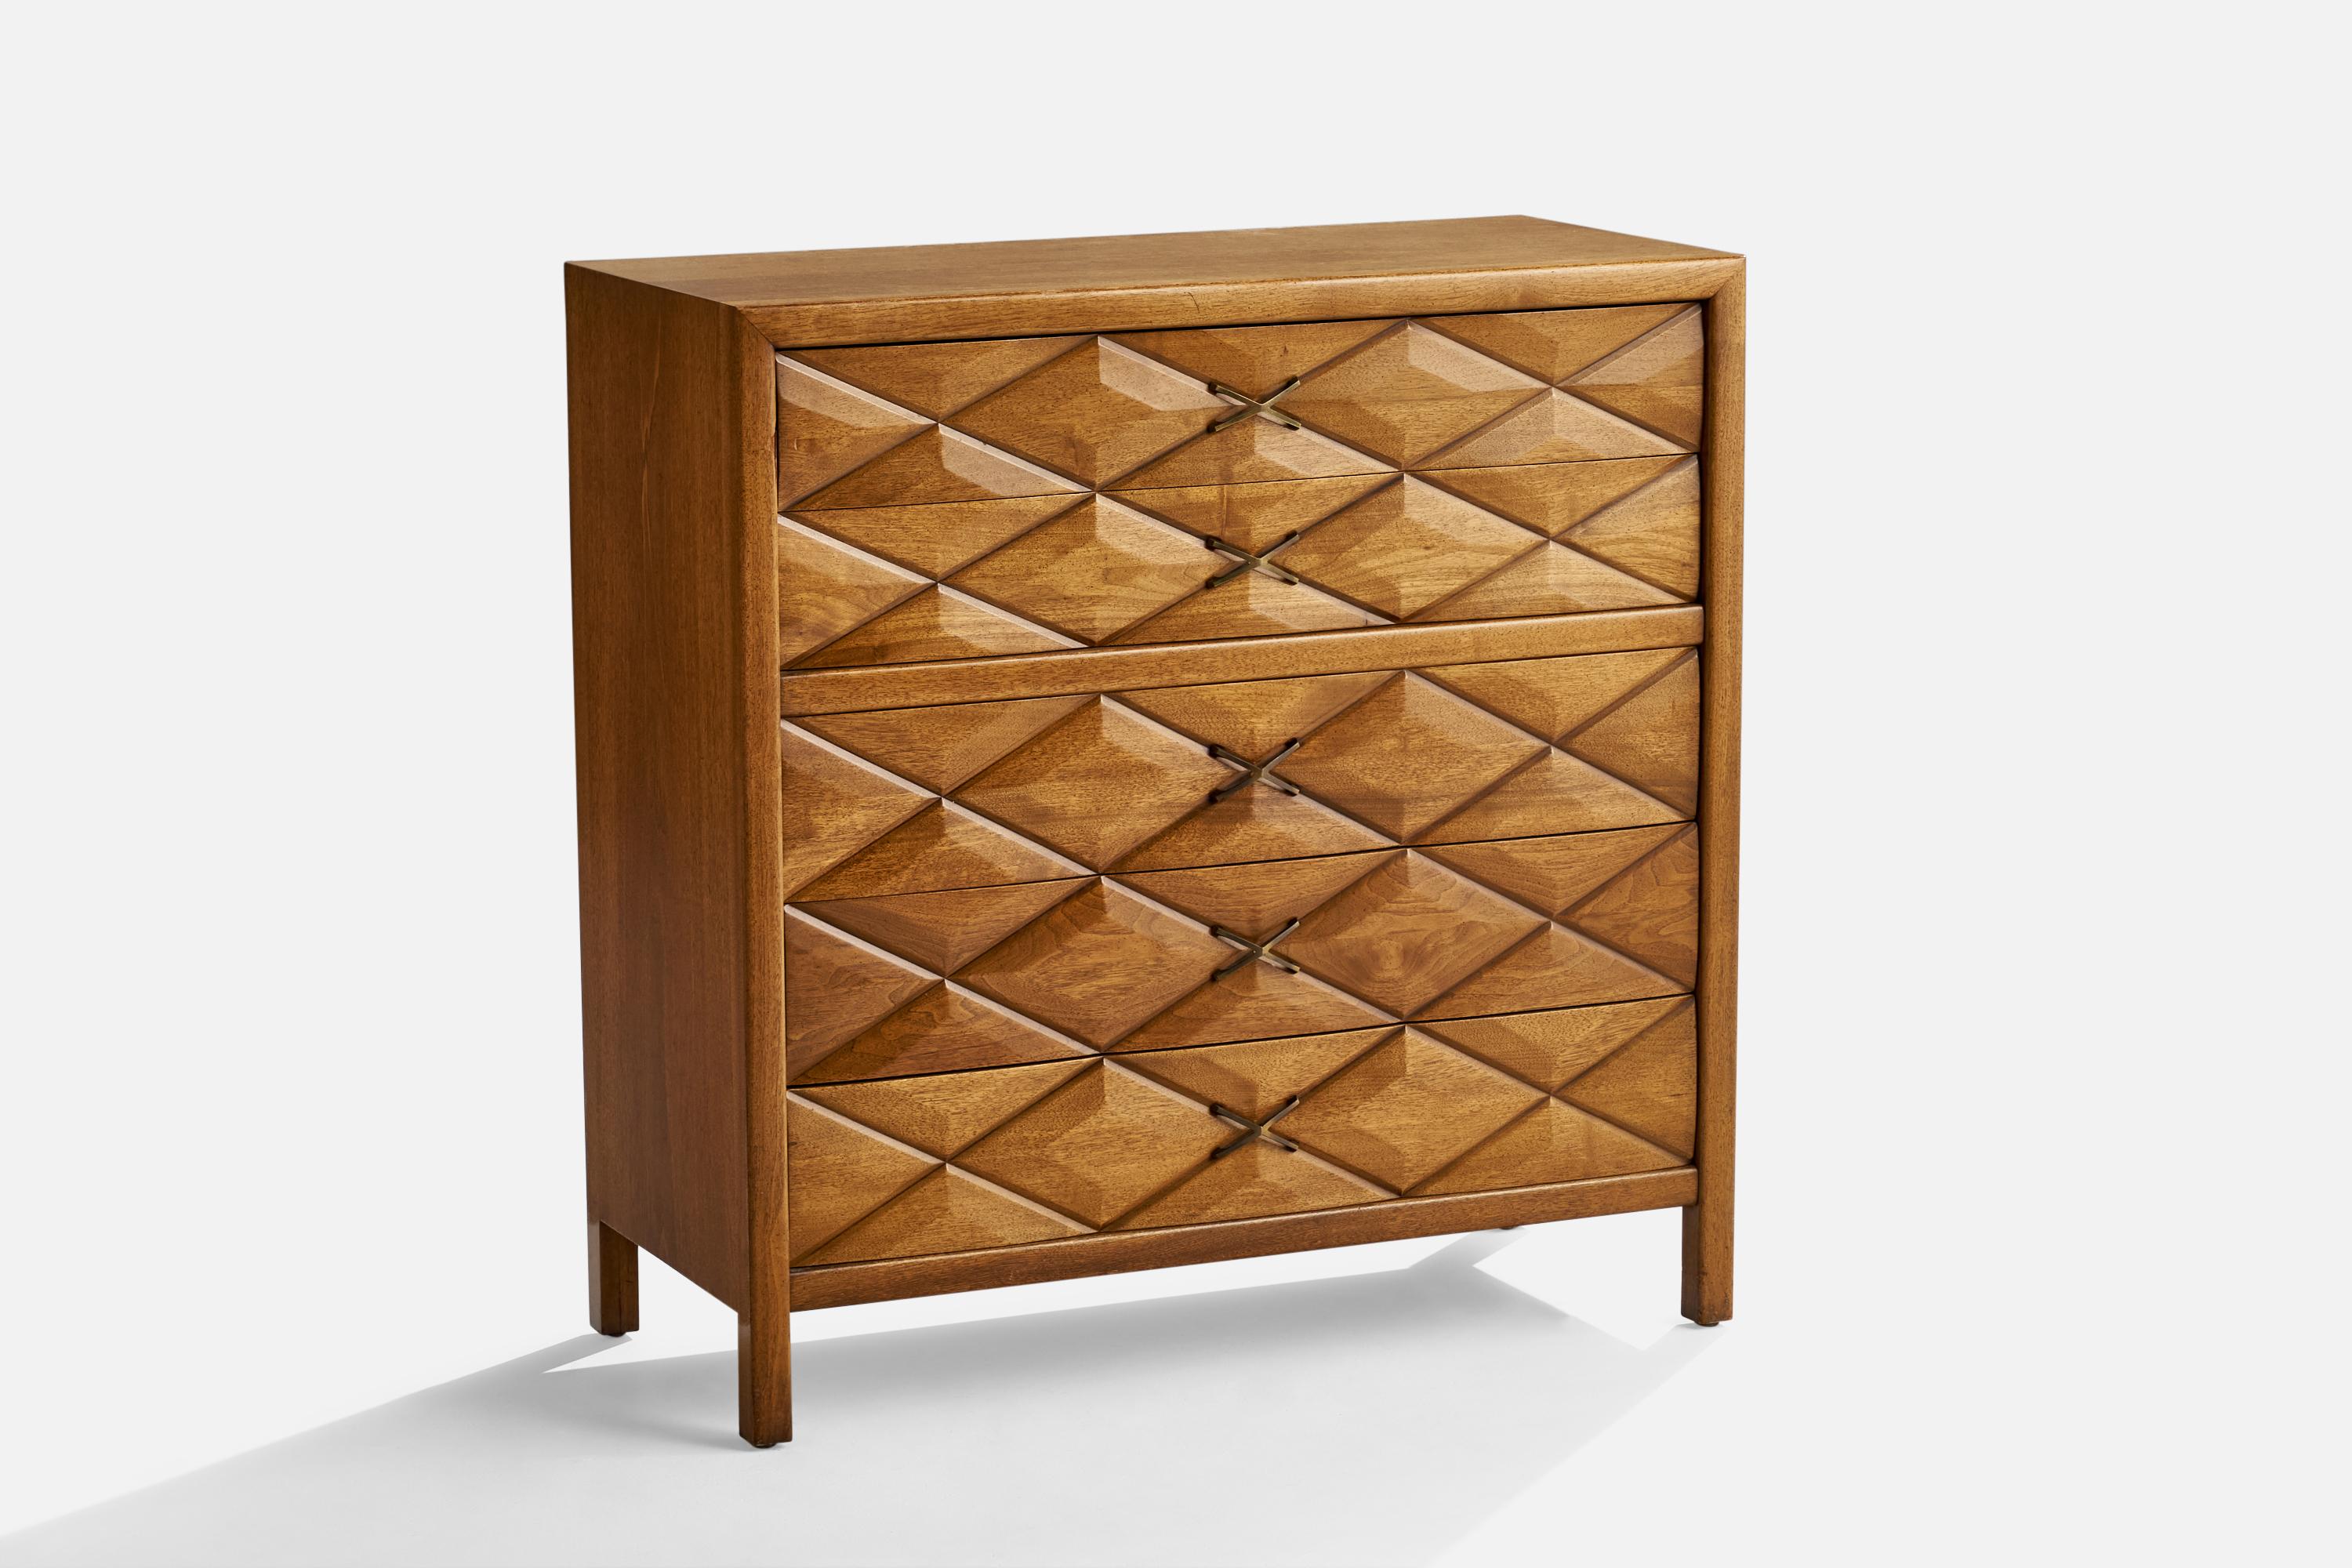 A walnut and brass chest of drawers designed and produced by Widdicomb, Grand Rapids, Michigan, USA, 1950s.